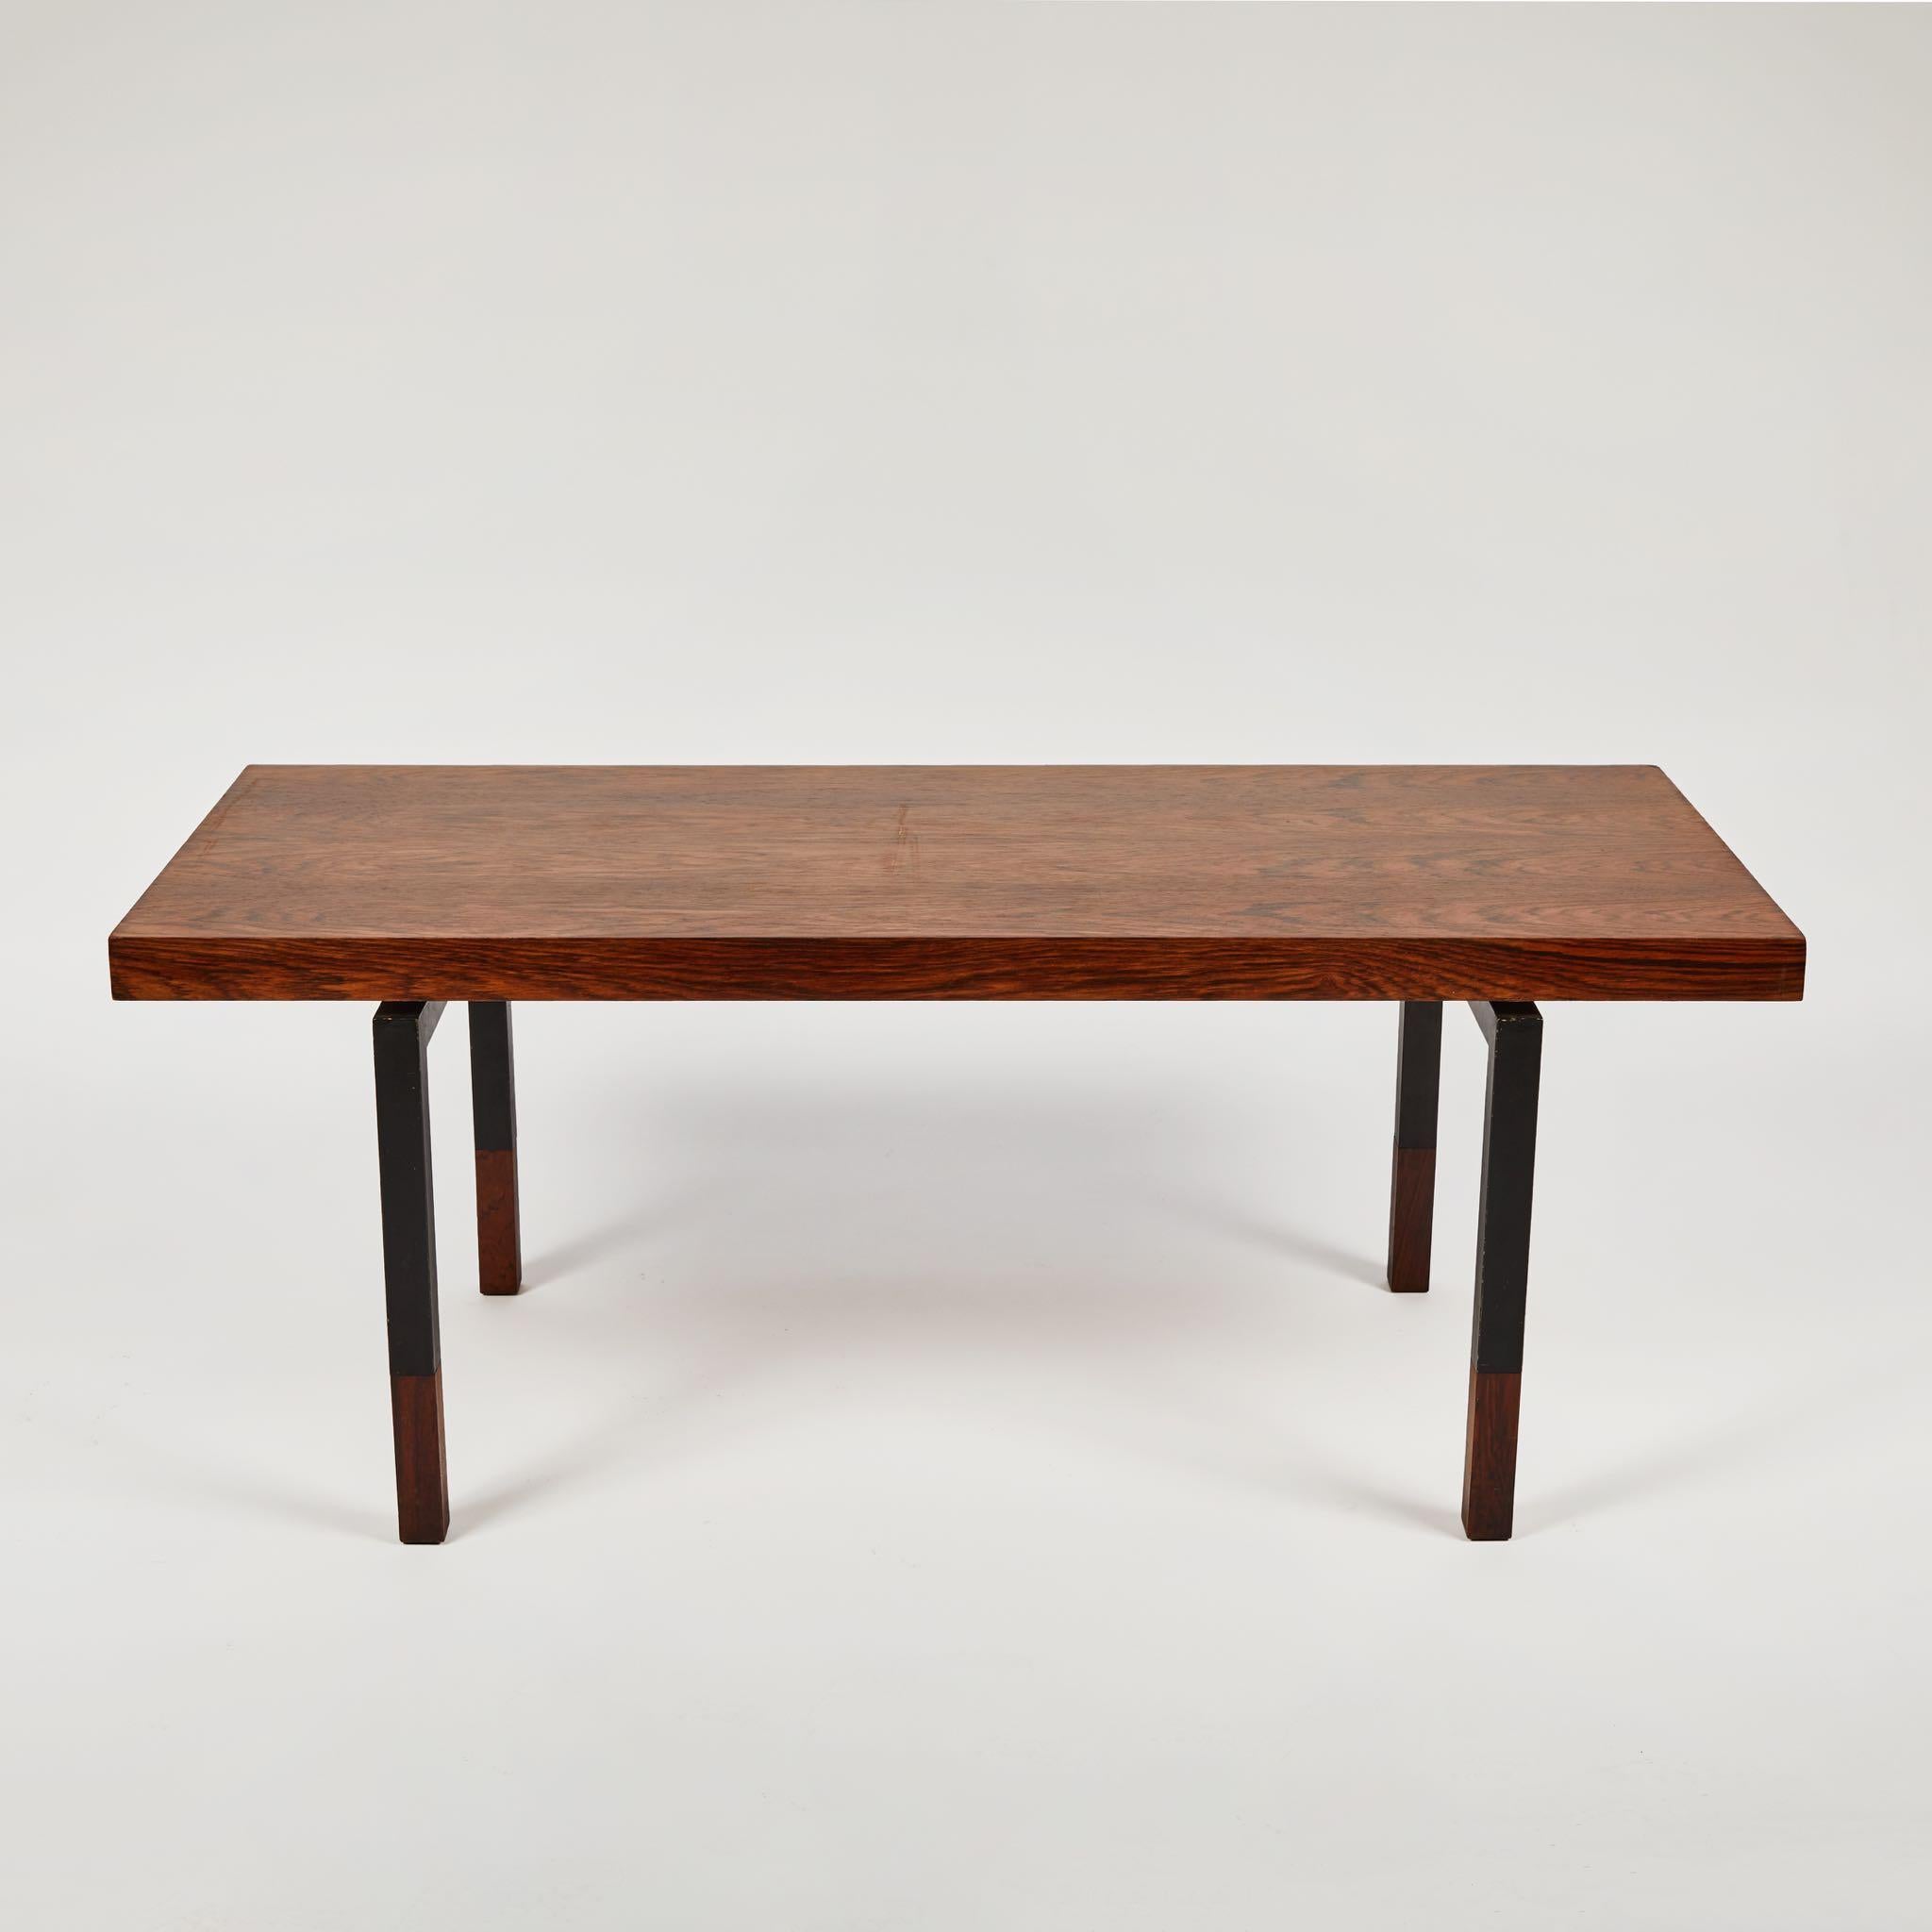 French 1960s coffee table with rectangular walnut top and slim black iron and walnut legs. A sleek and geometric mid-century modern piece with wonderful lines; the top appears almost to be floating in space. 

France, circa 1960

Dimensions: 45W x